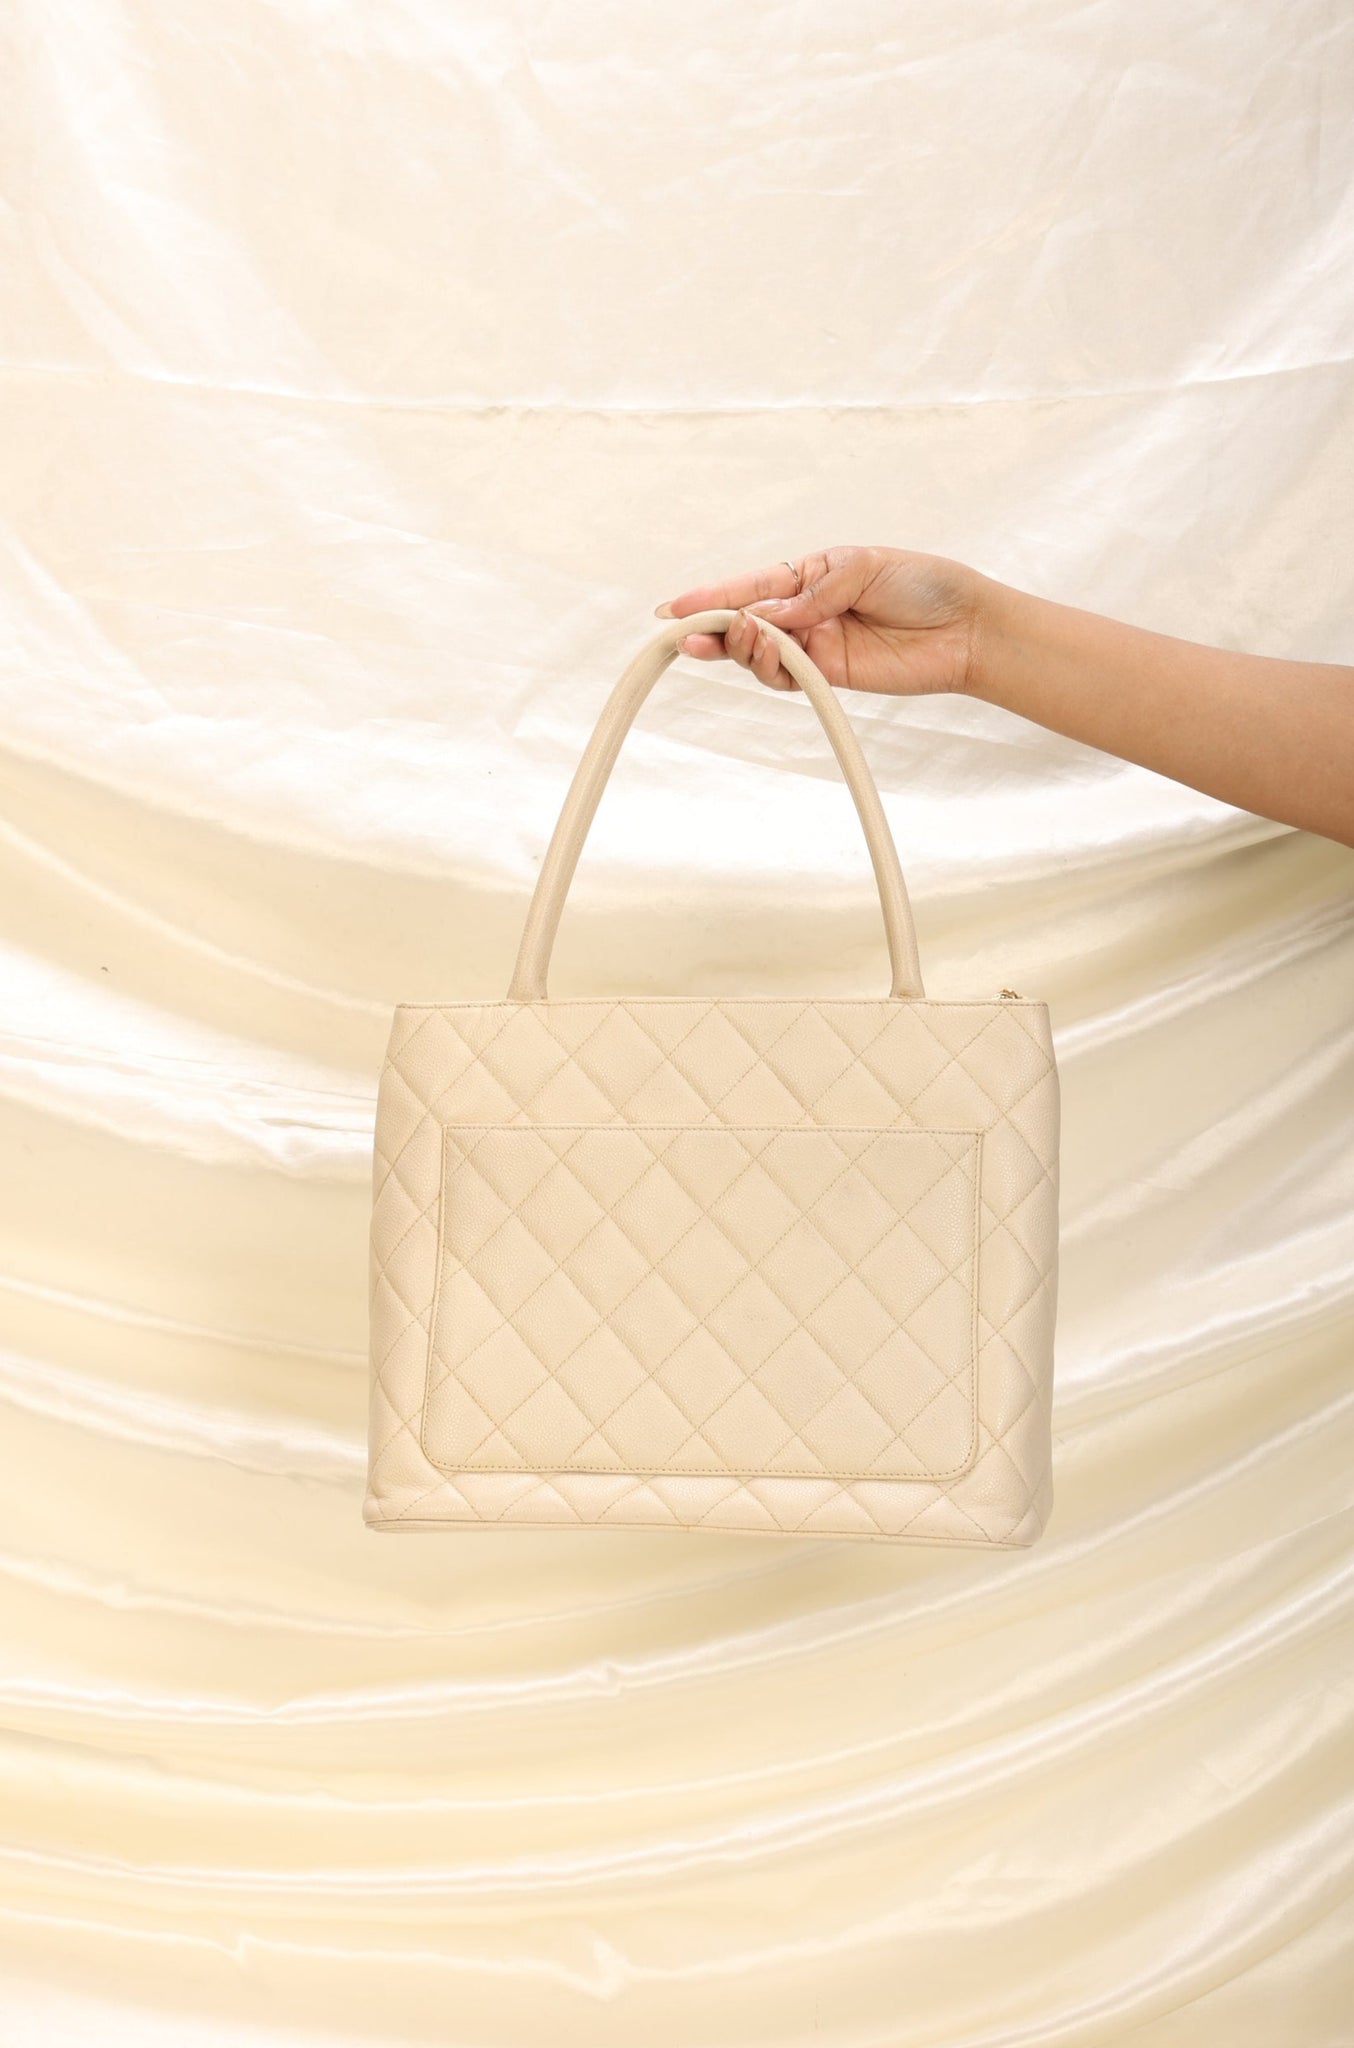 Chanel Ivory Medallion Tote